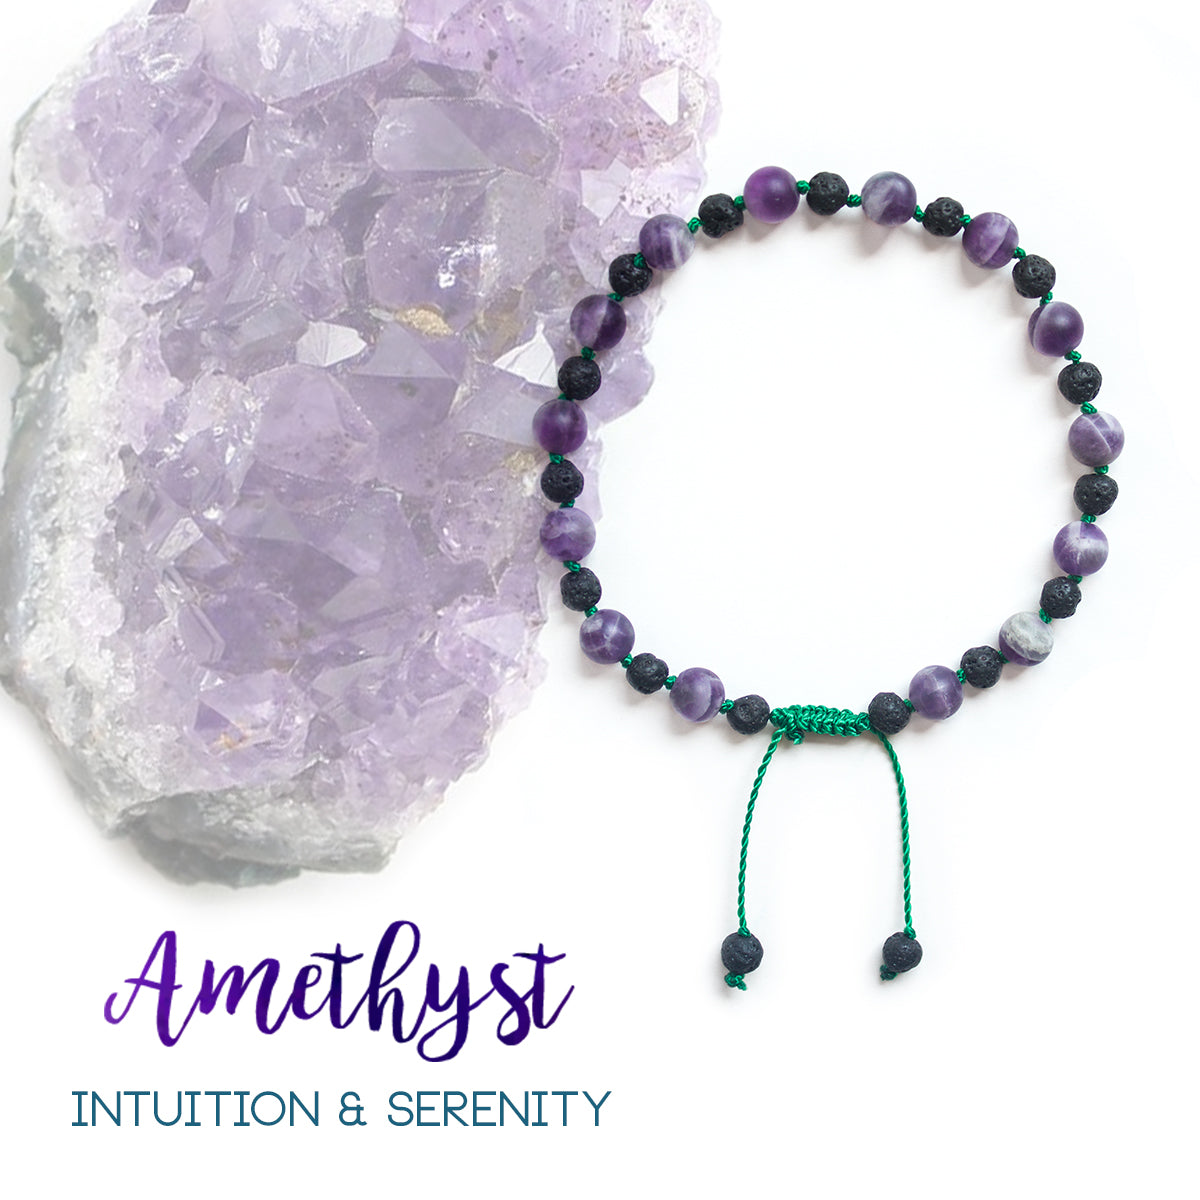 Amethyst: Stone of Intuition & Serenity